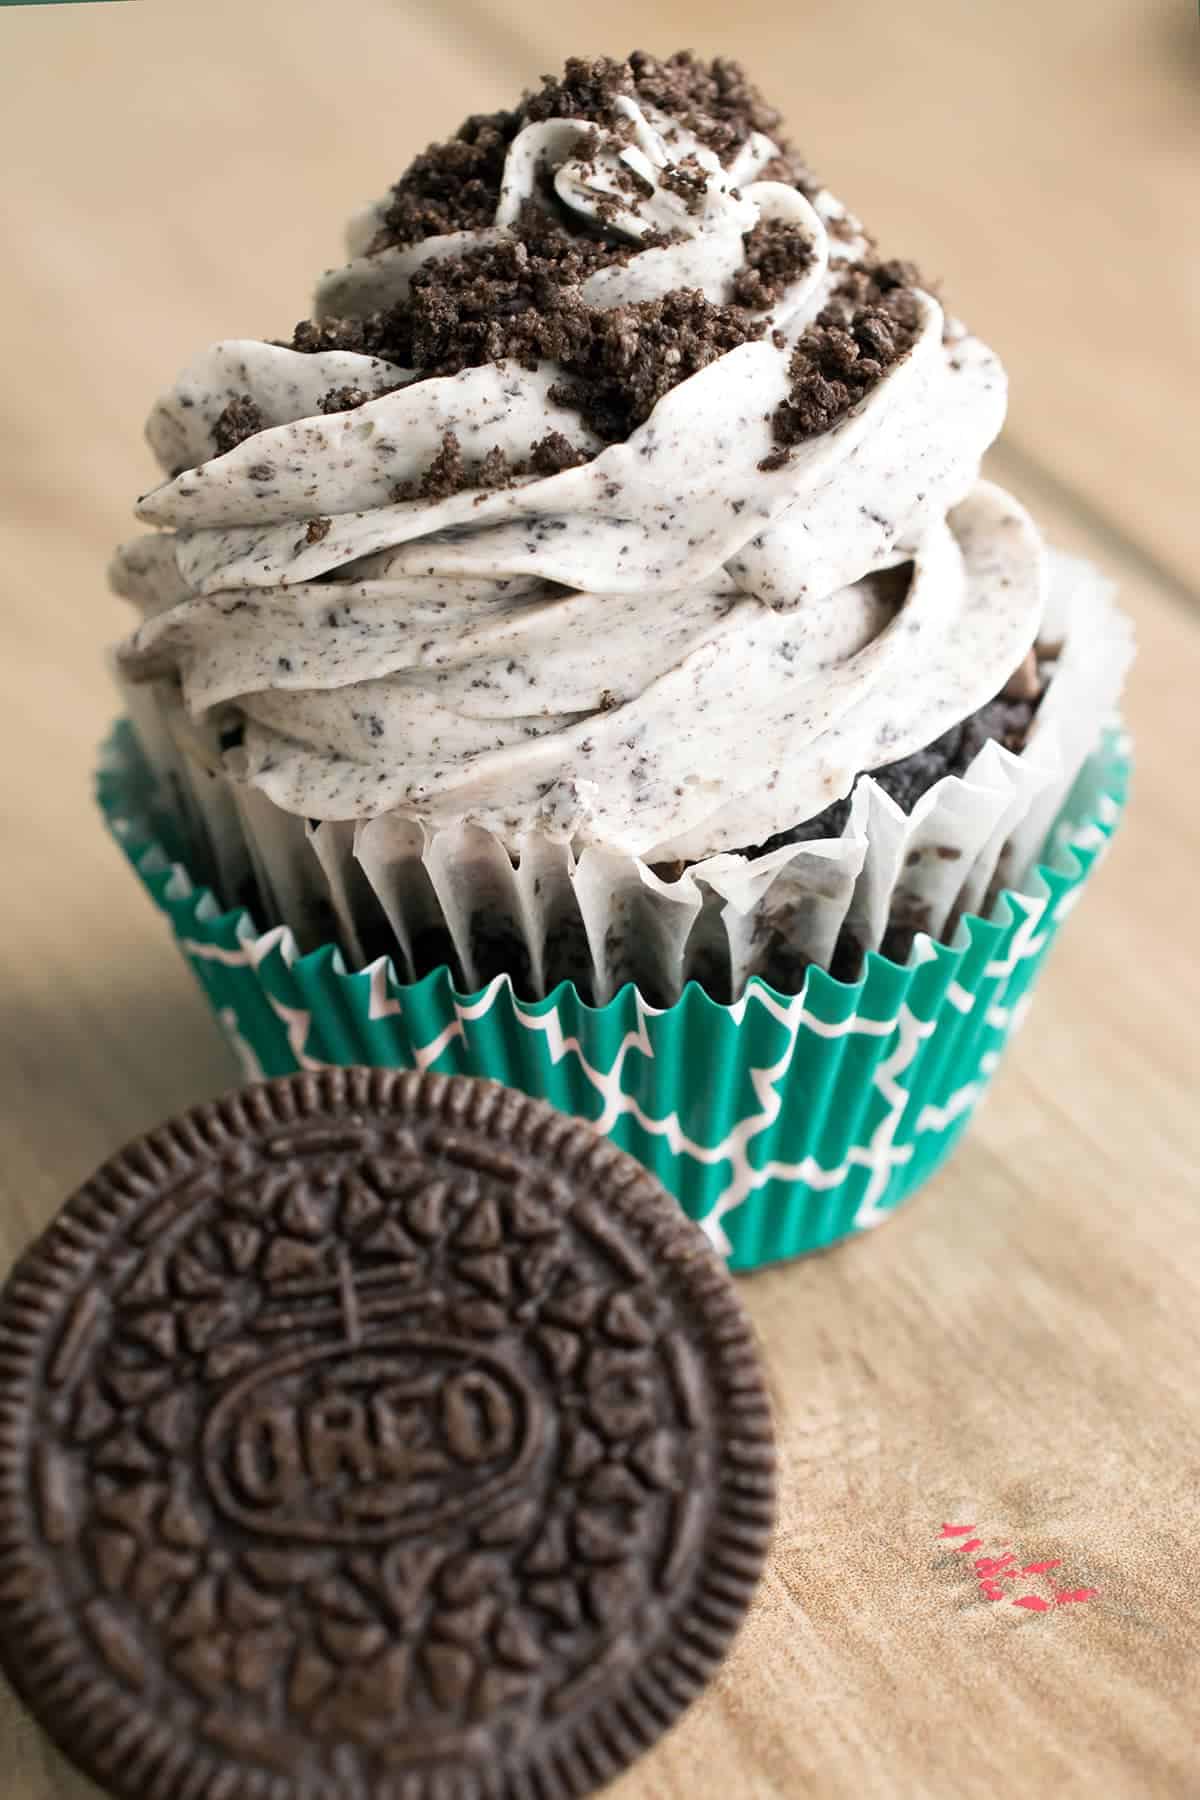 Cookies and Cream frosting swirled on chocolate cupcake, dusted with Oreo crumbles, in turquoise liner, beside whole Oreo cookie. 